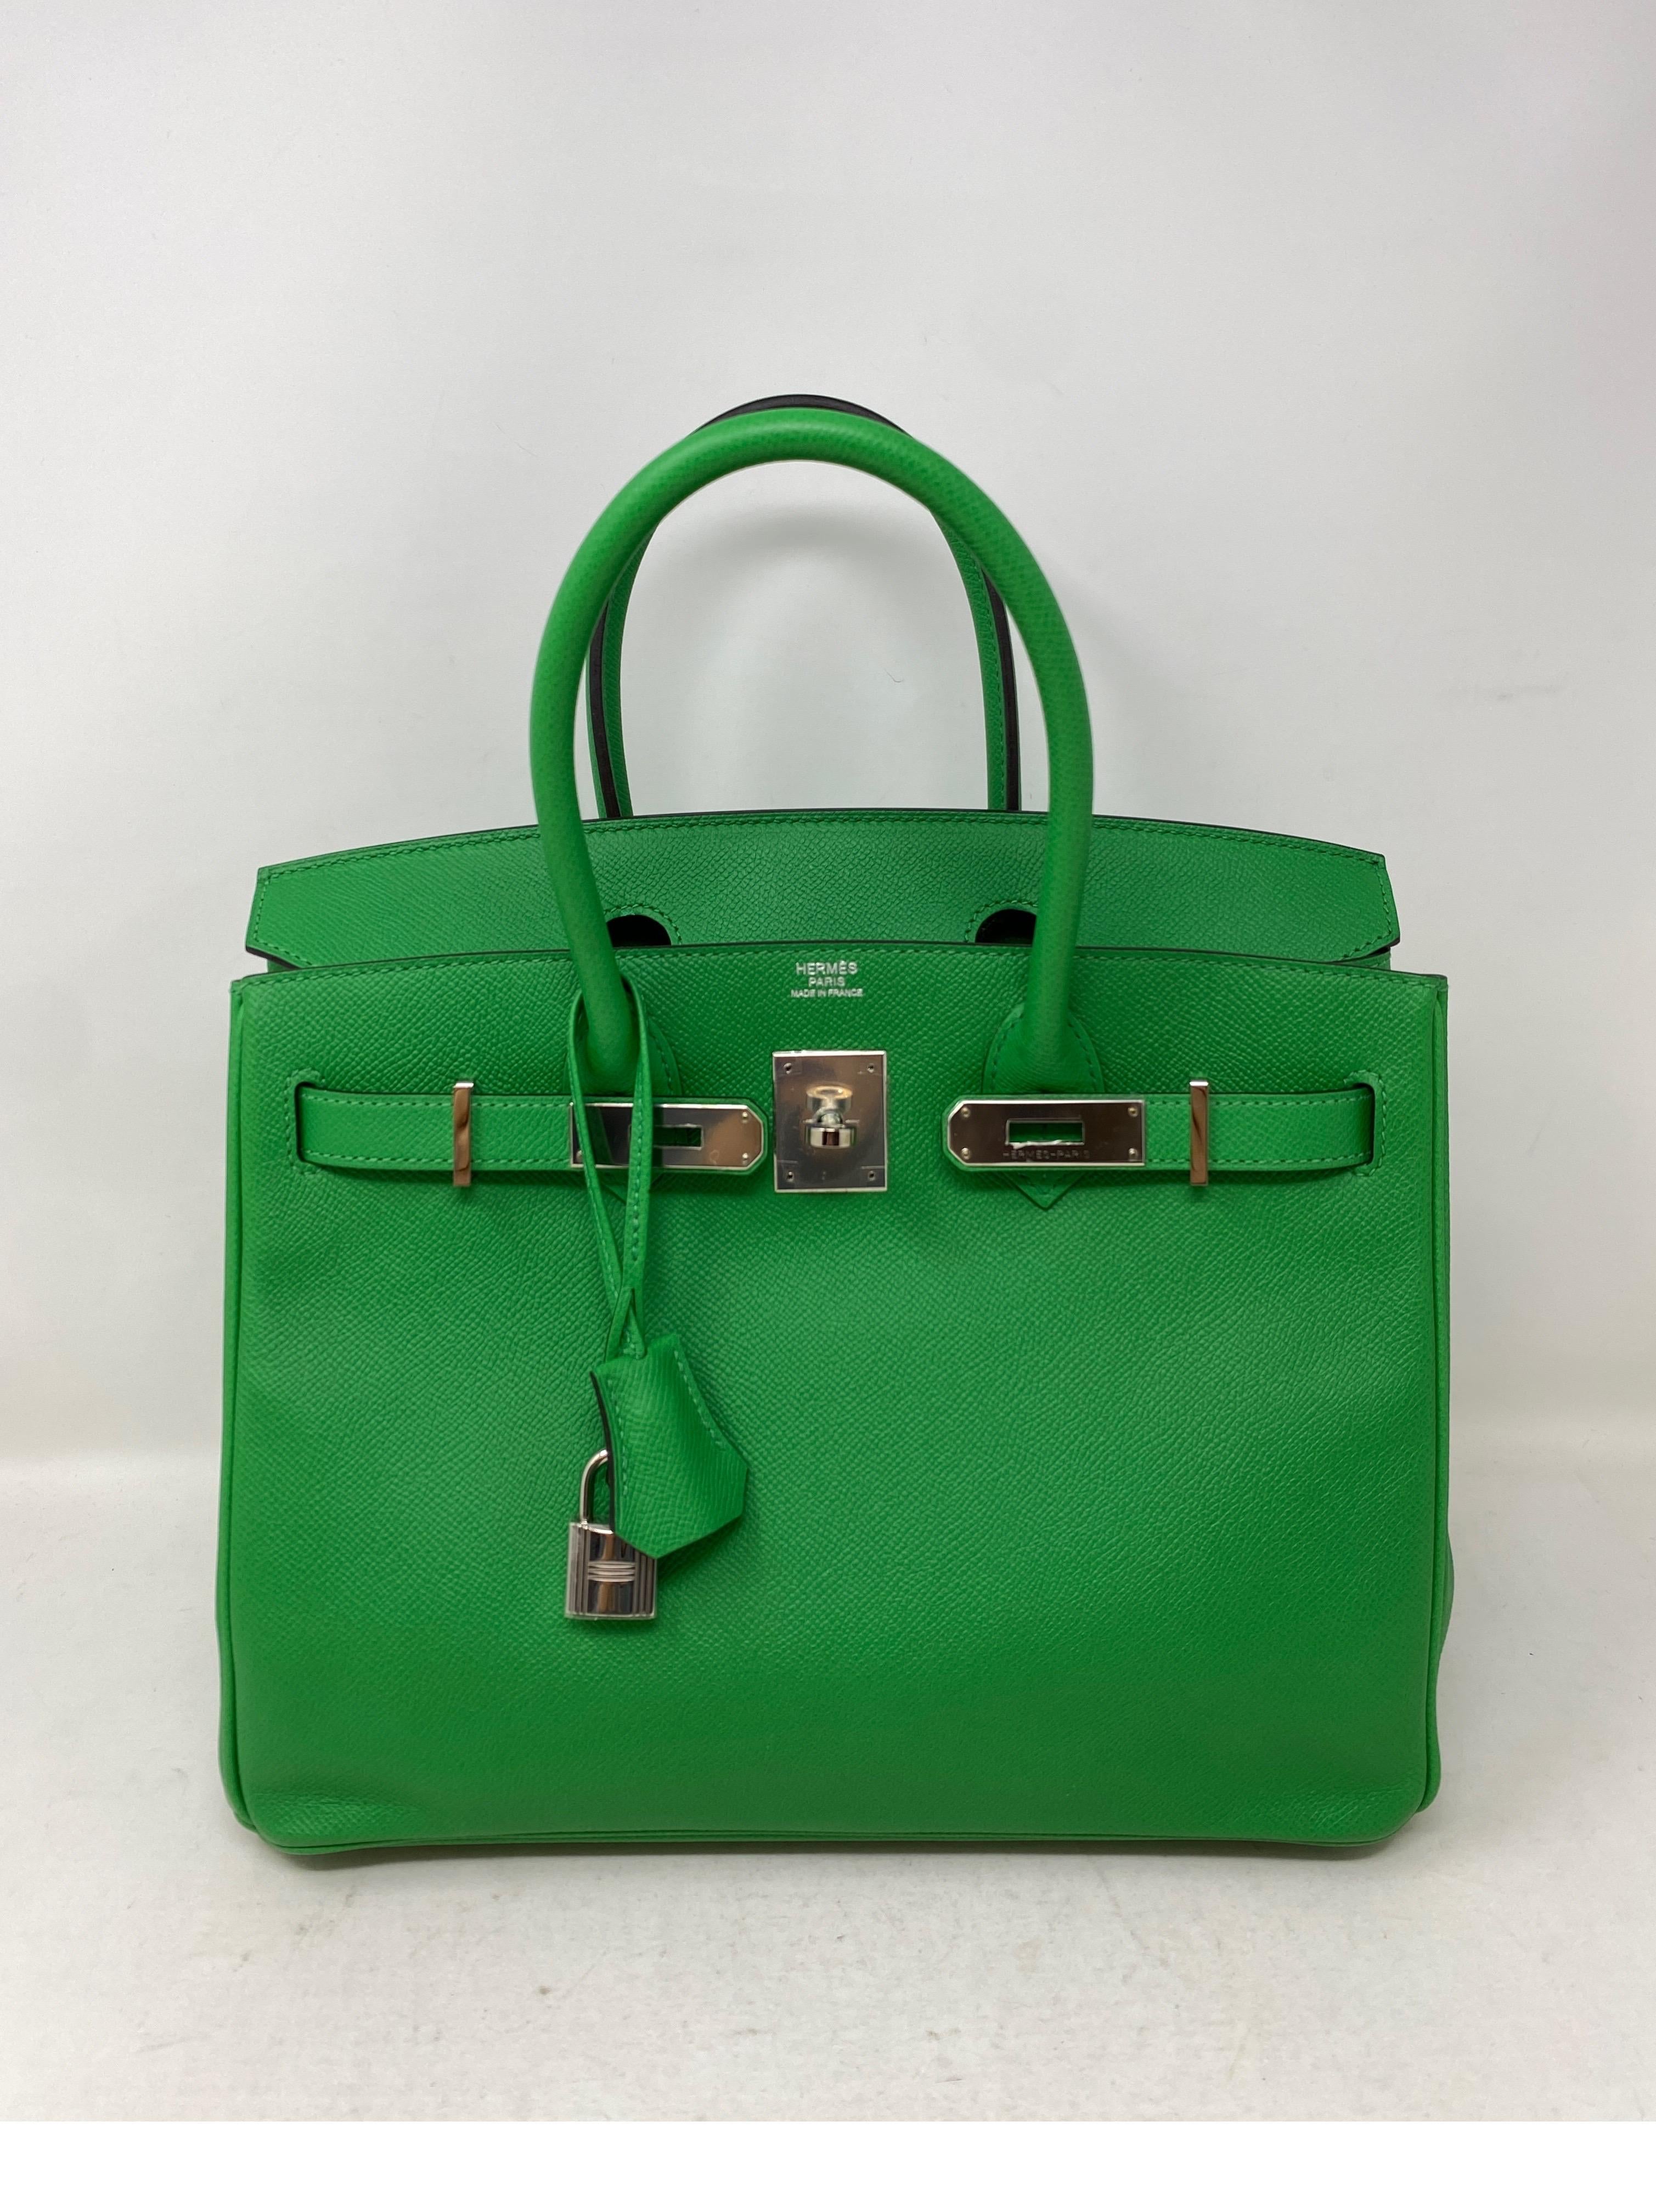 Hermes Bamboo Green Birkin 30 Bag. Epsom leather. Palladium hardware. Excellent like new condition. Stunning green color. Plastic still on hardware. Includes clochette, lock, keys, and dust cover. Guaranteed authentic. 